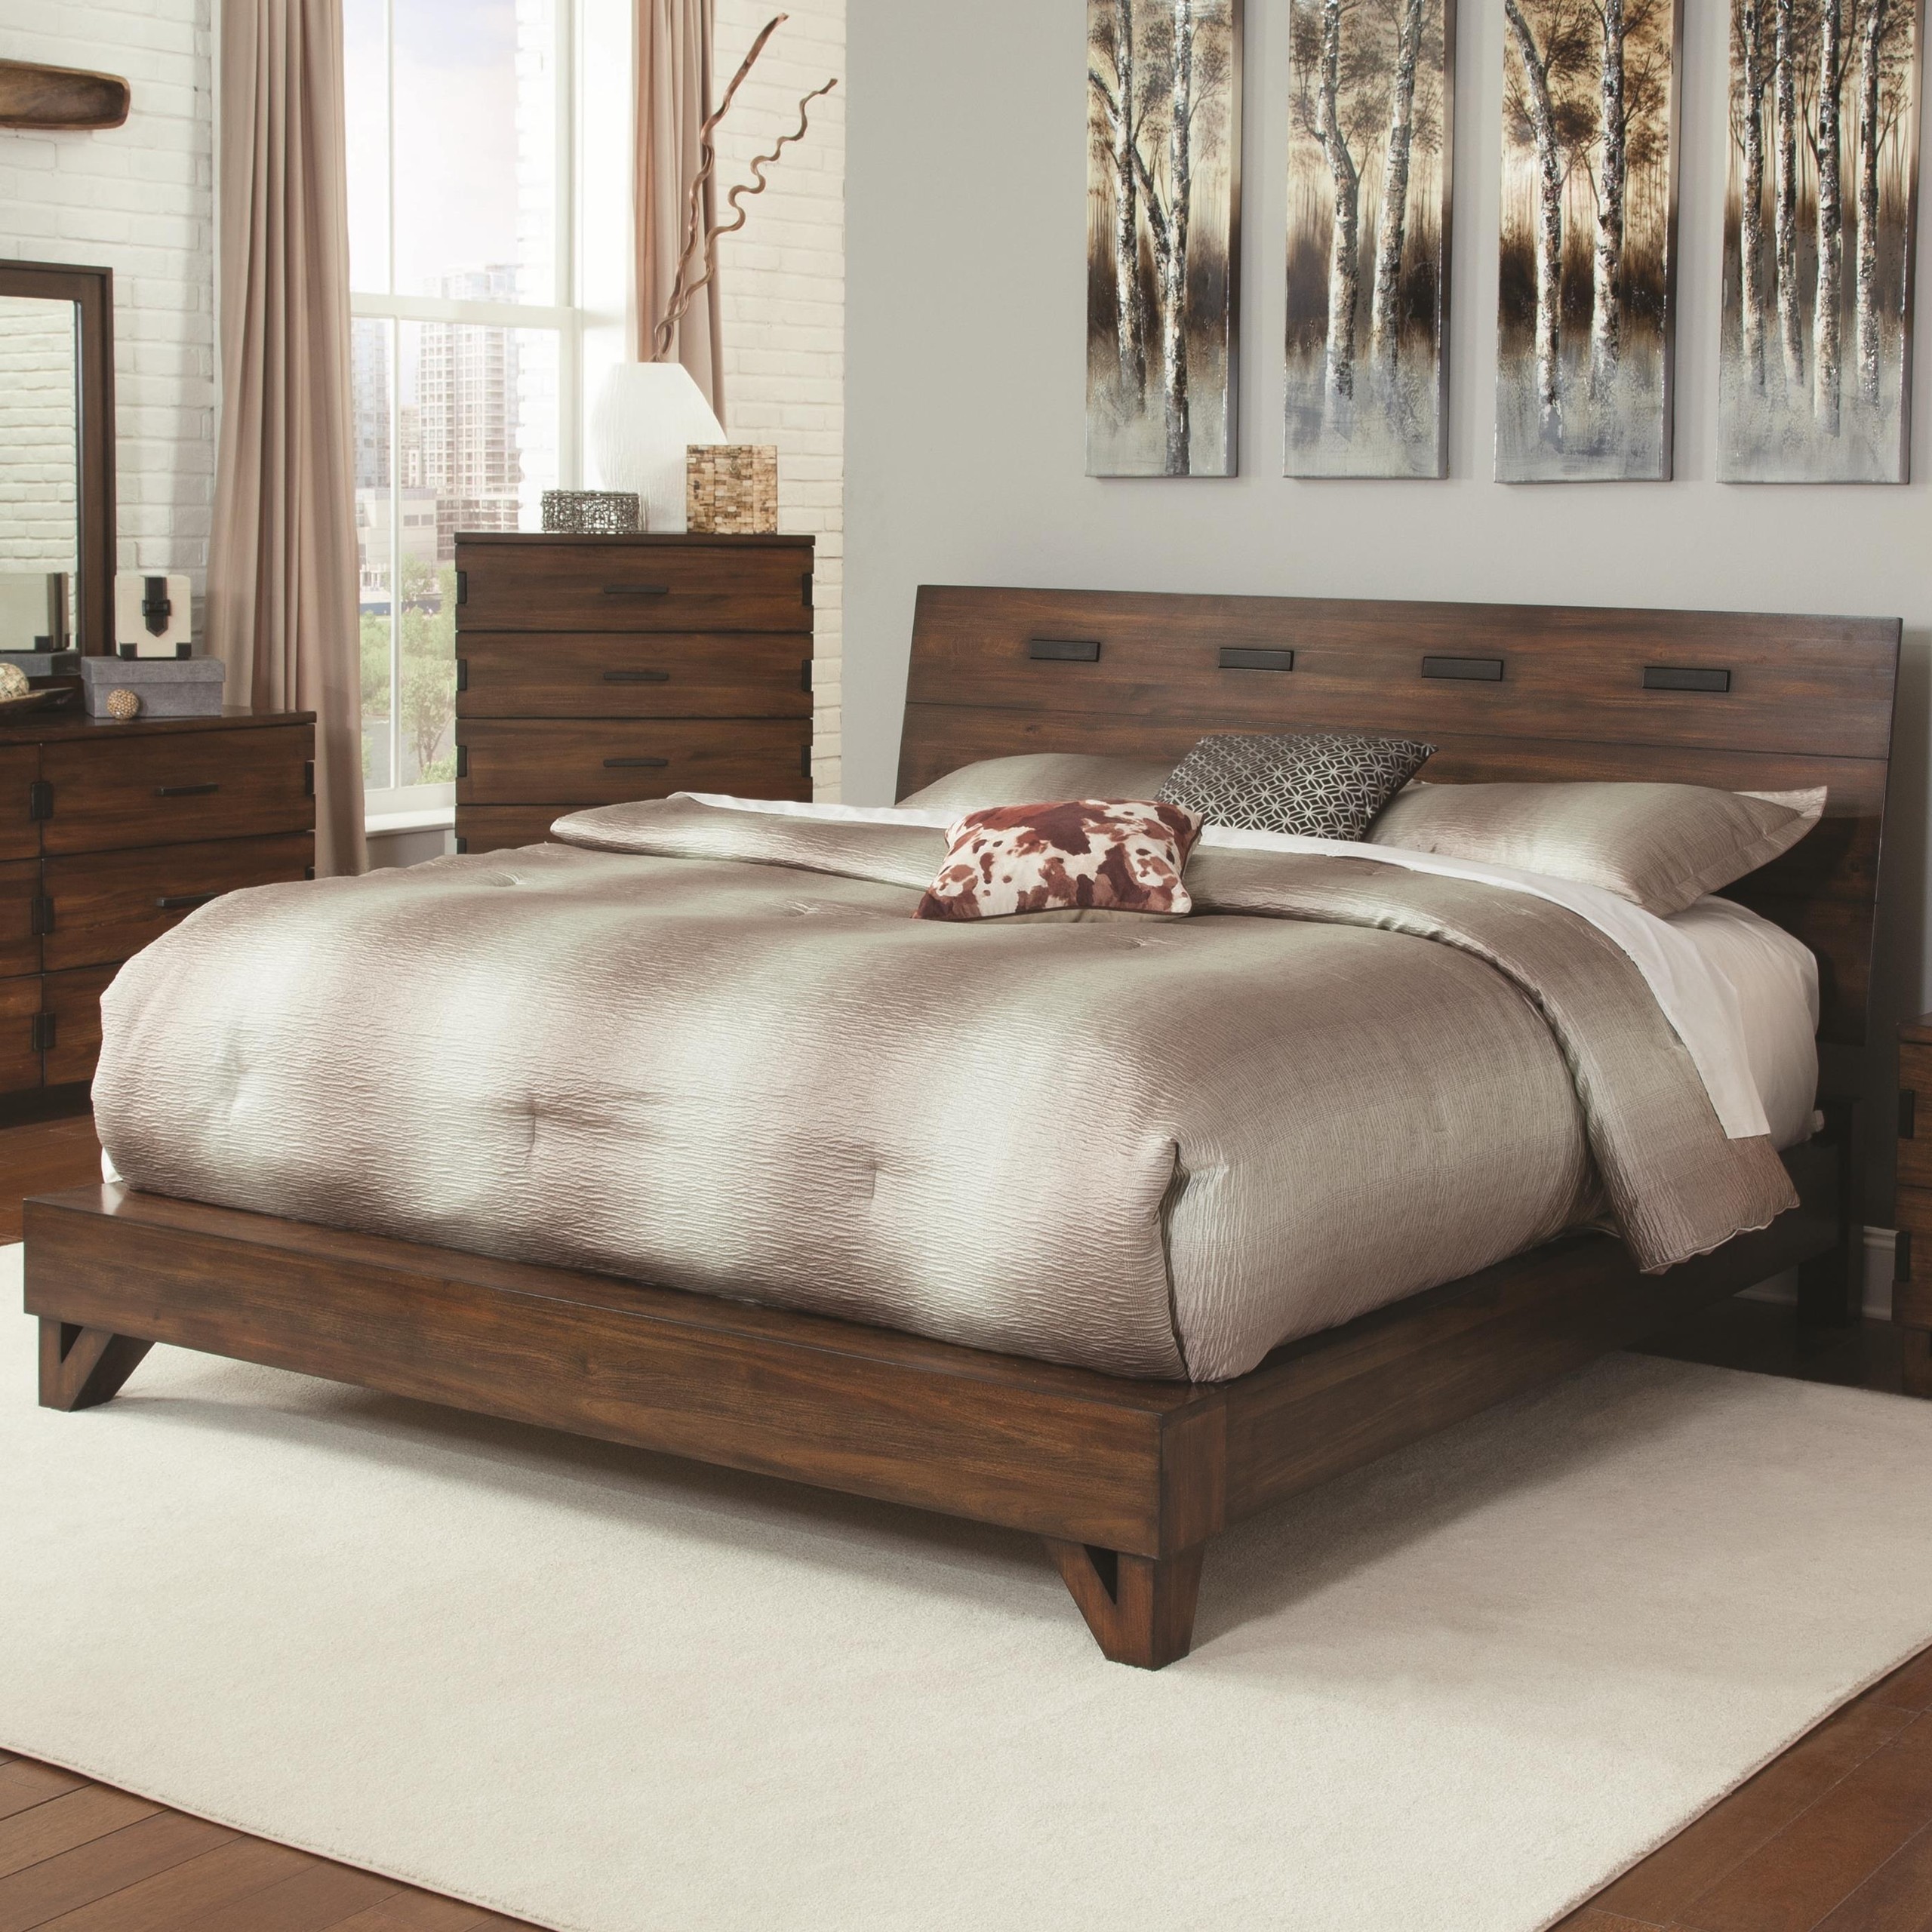 Coaster yorkshire rustic queen bed with contemporary